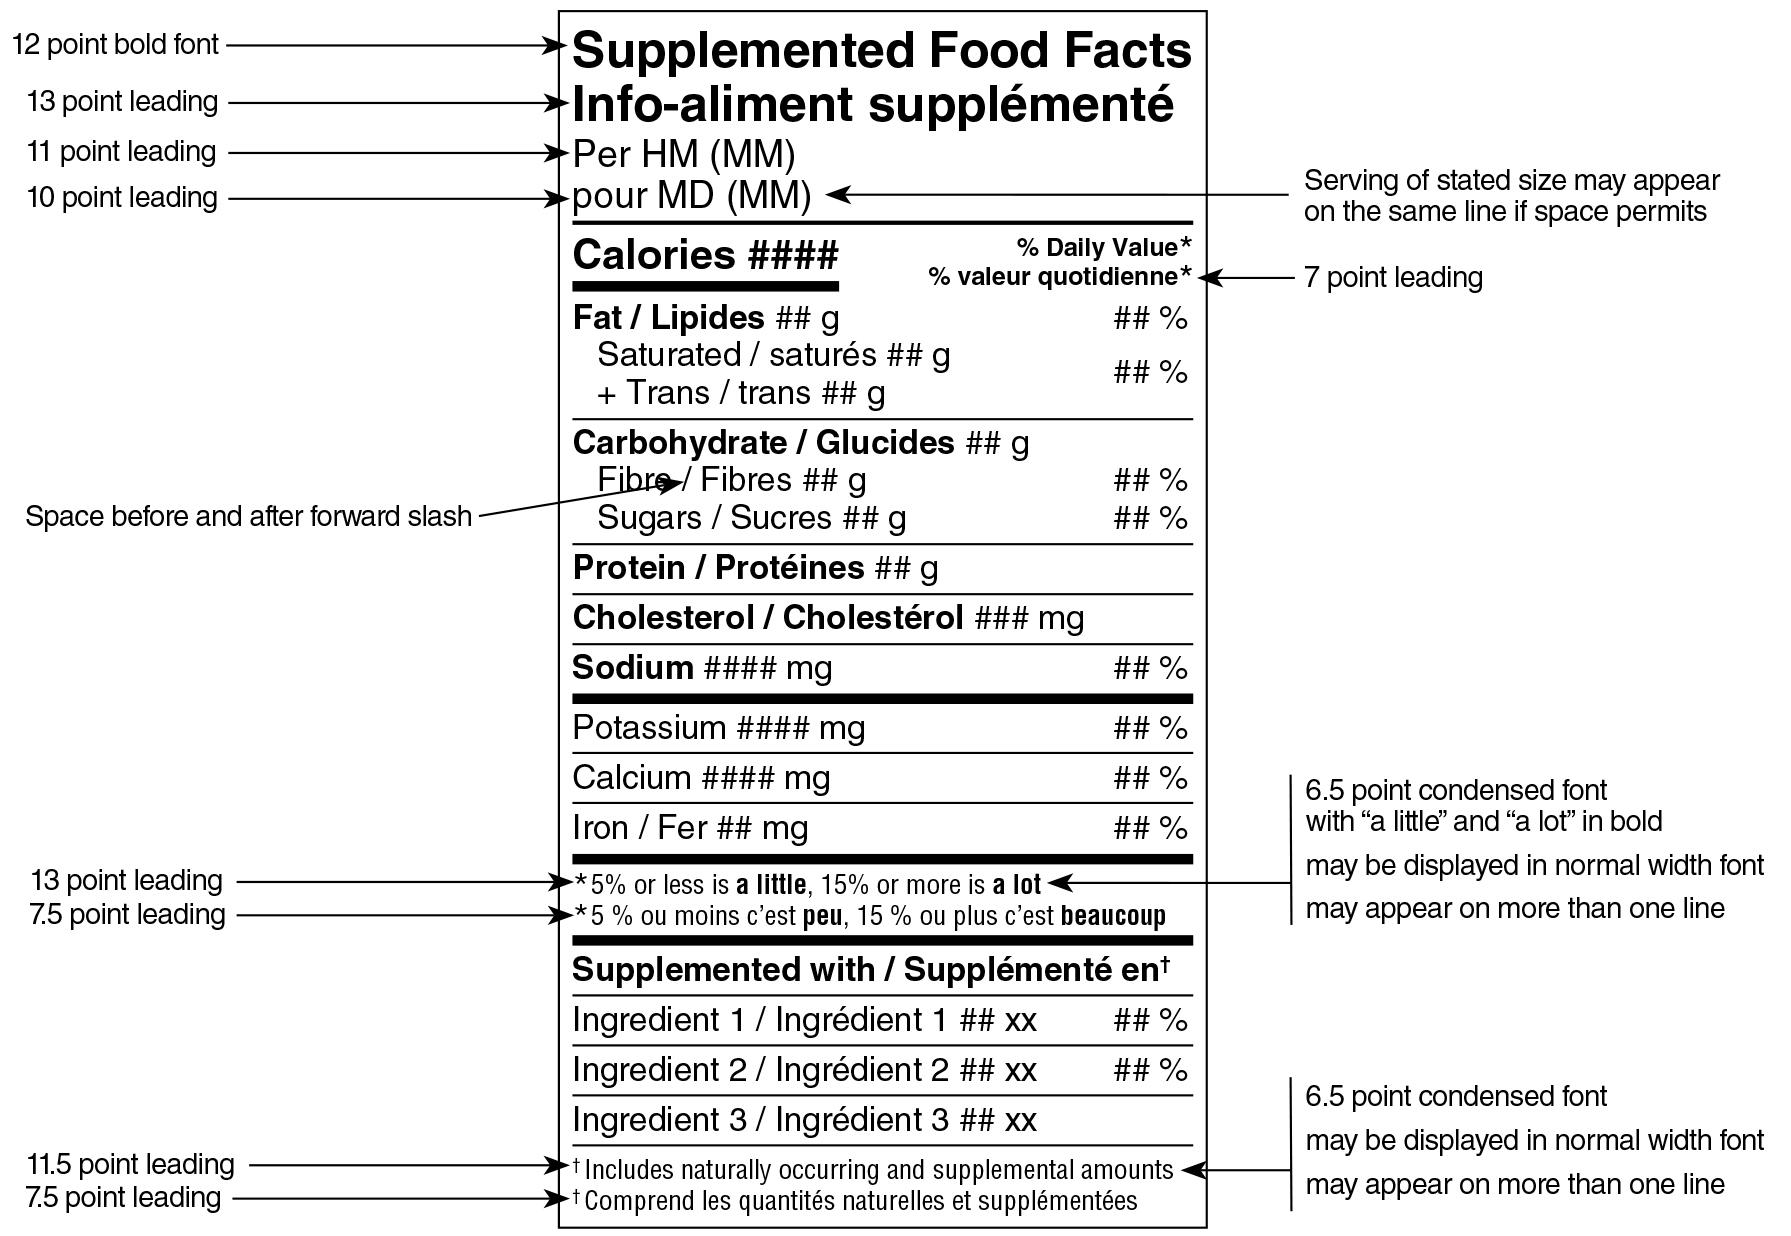 A bilingual Supplemented Food Facts table in standard format surrounded by specifications. Text version below.